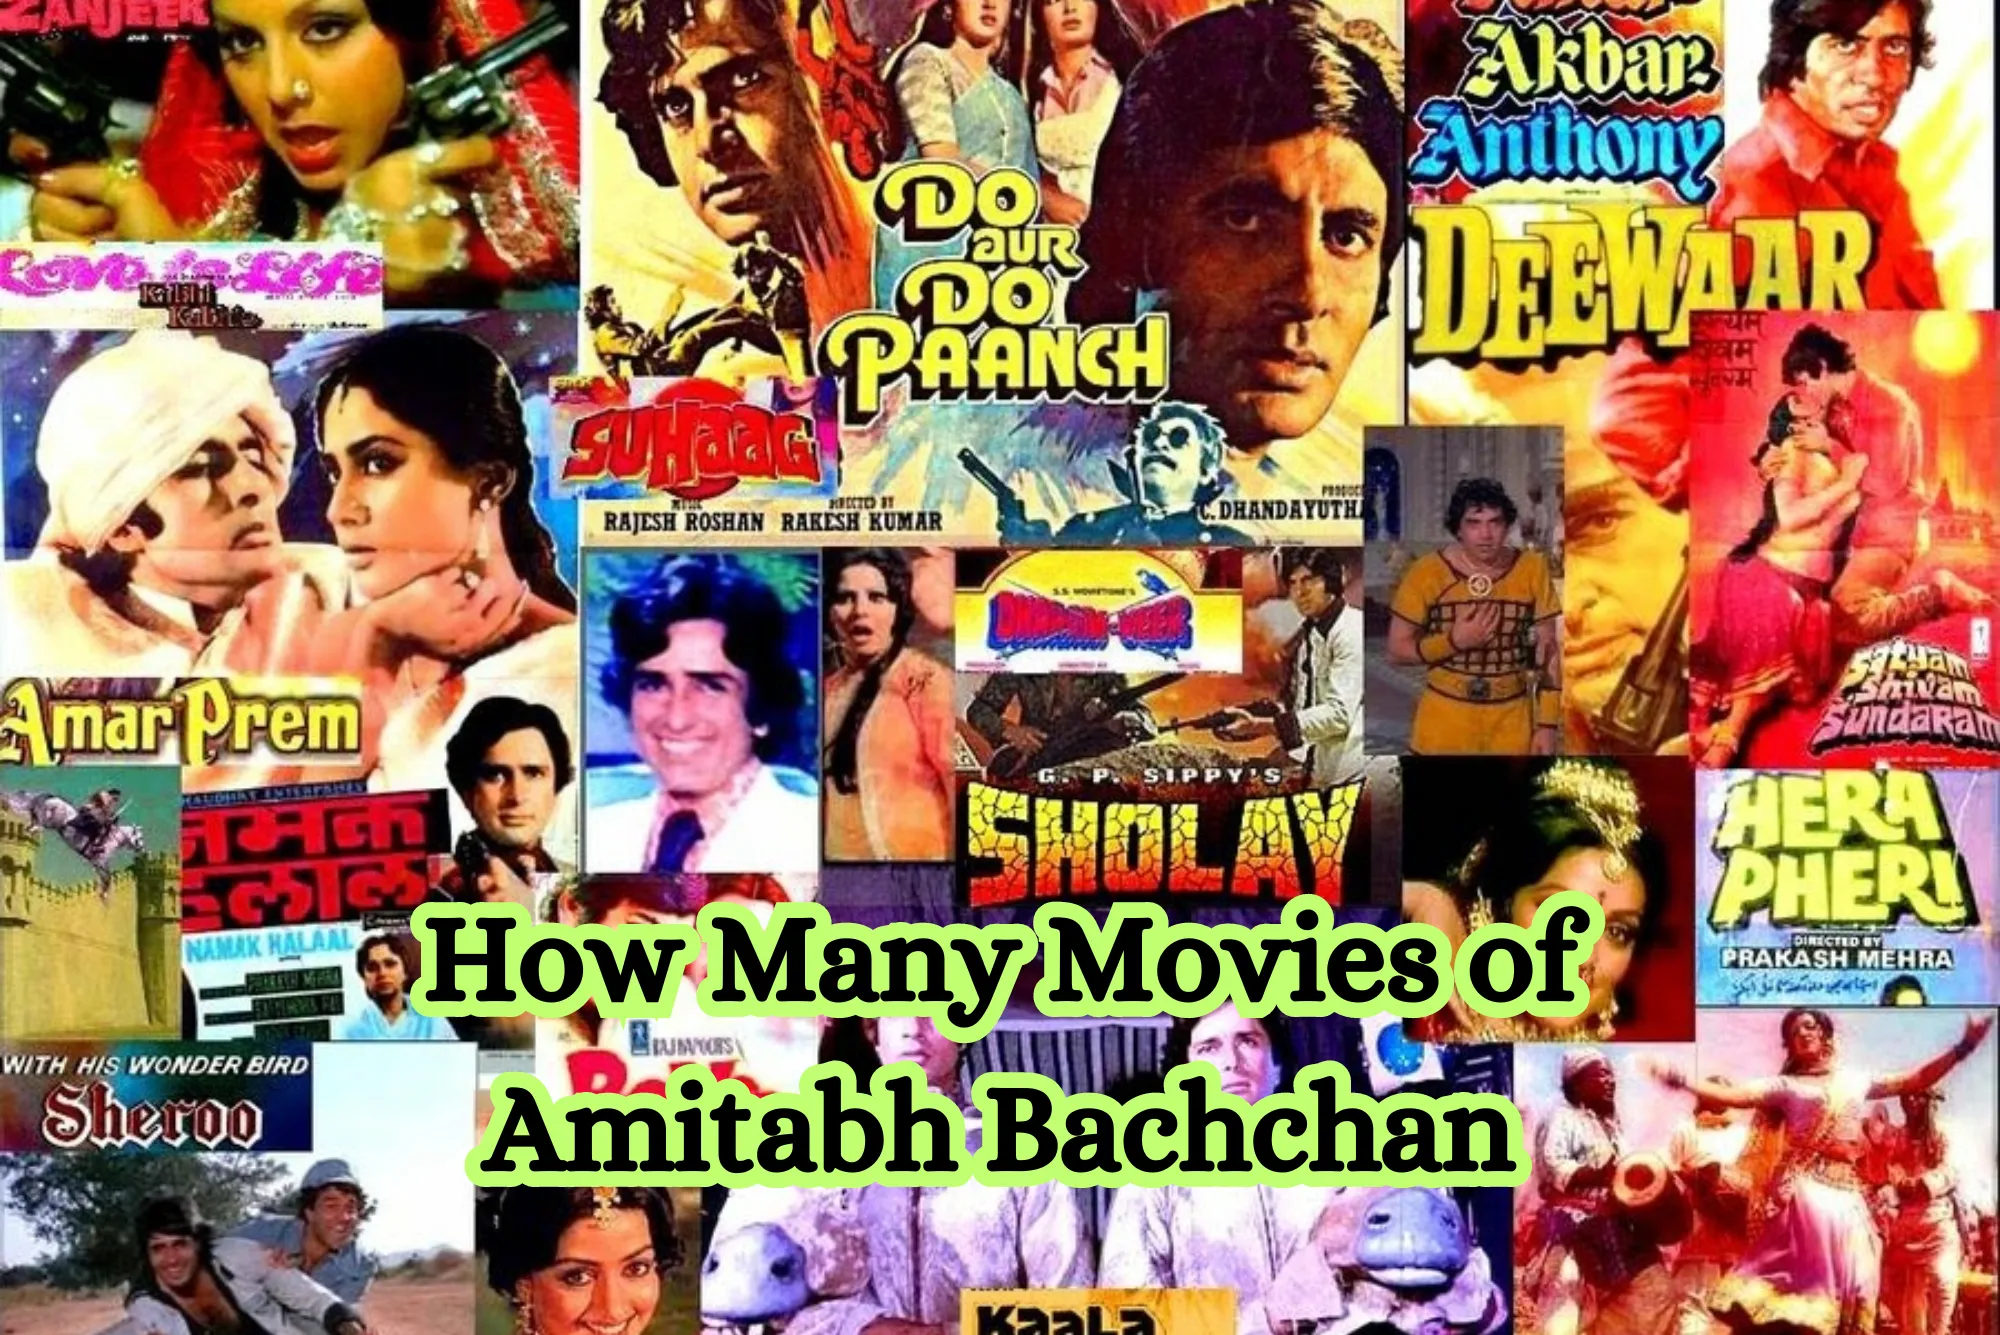 How Many Movies of Amitabh Bachchan